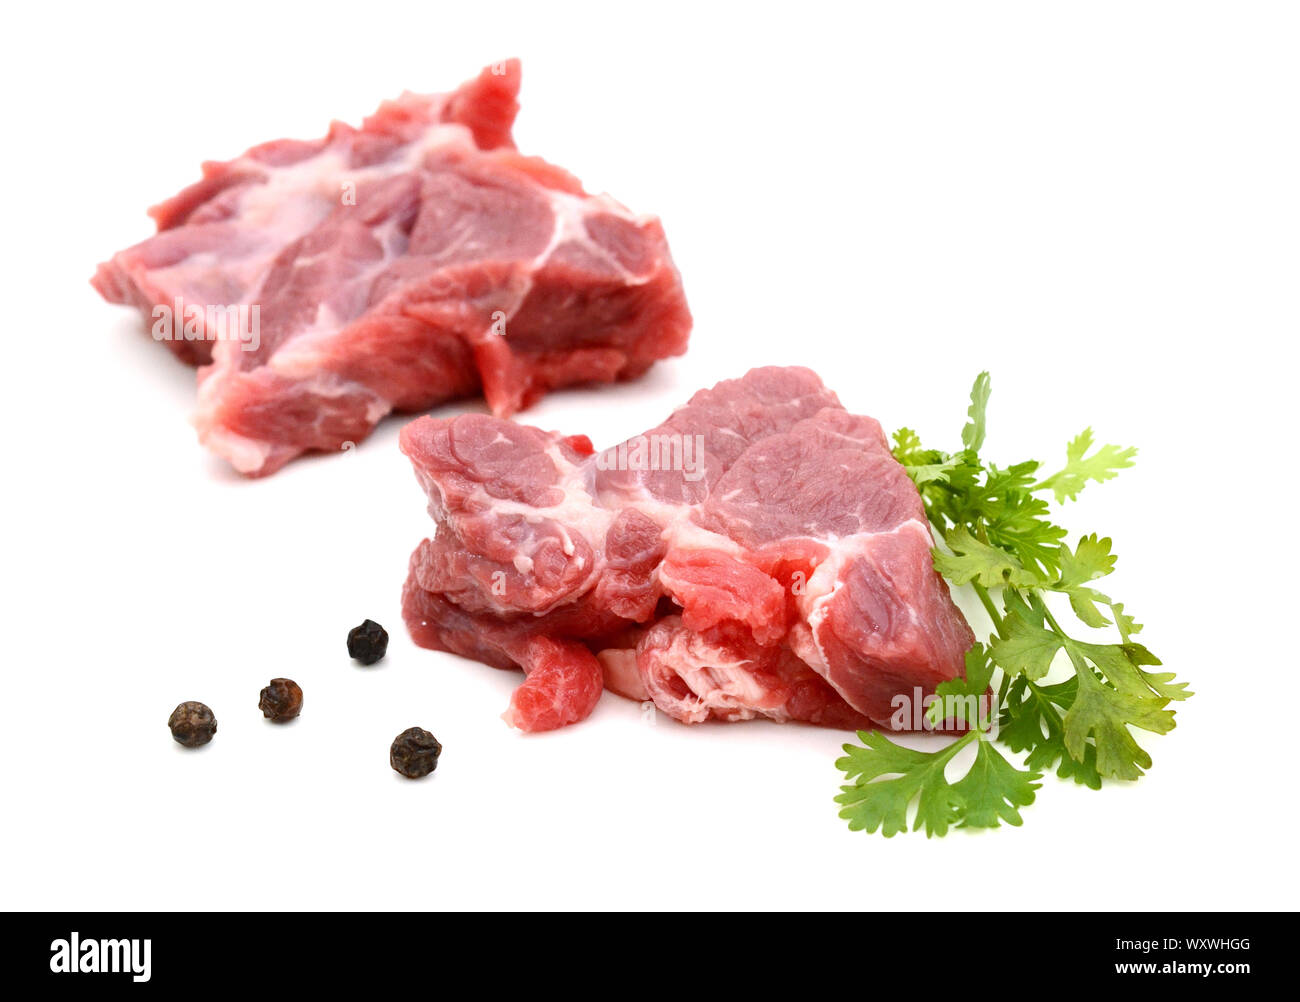 Raw beef and anise, leaf on the white background Stock Photo